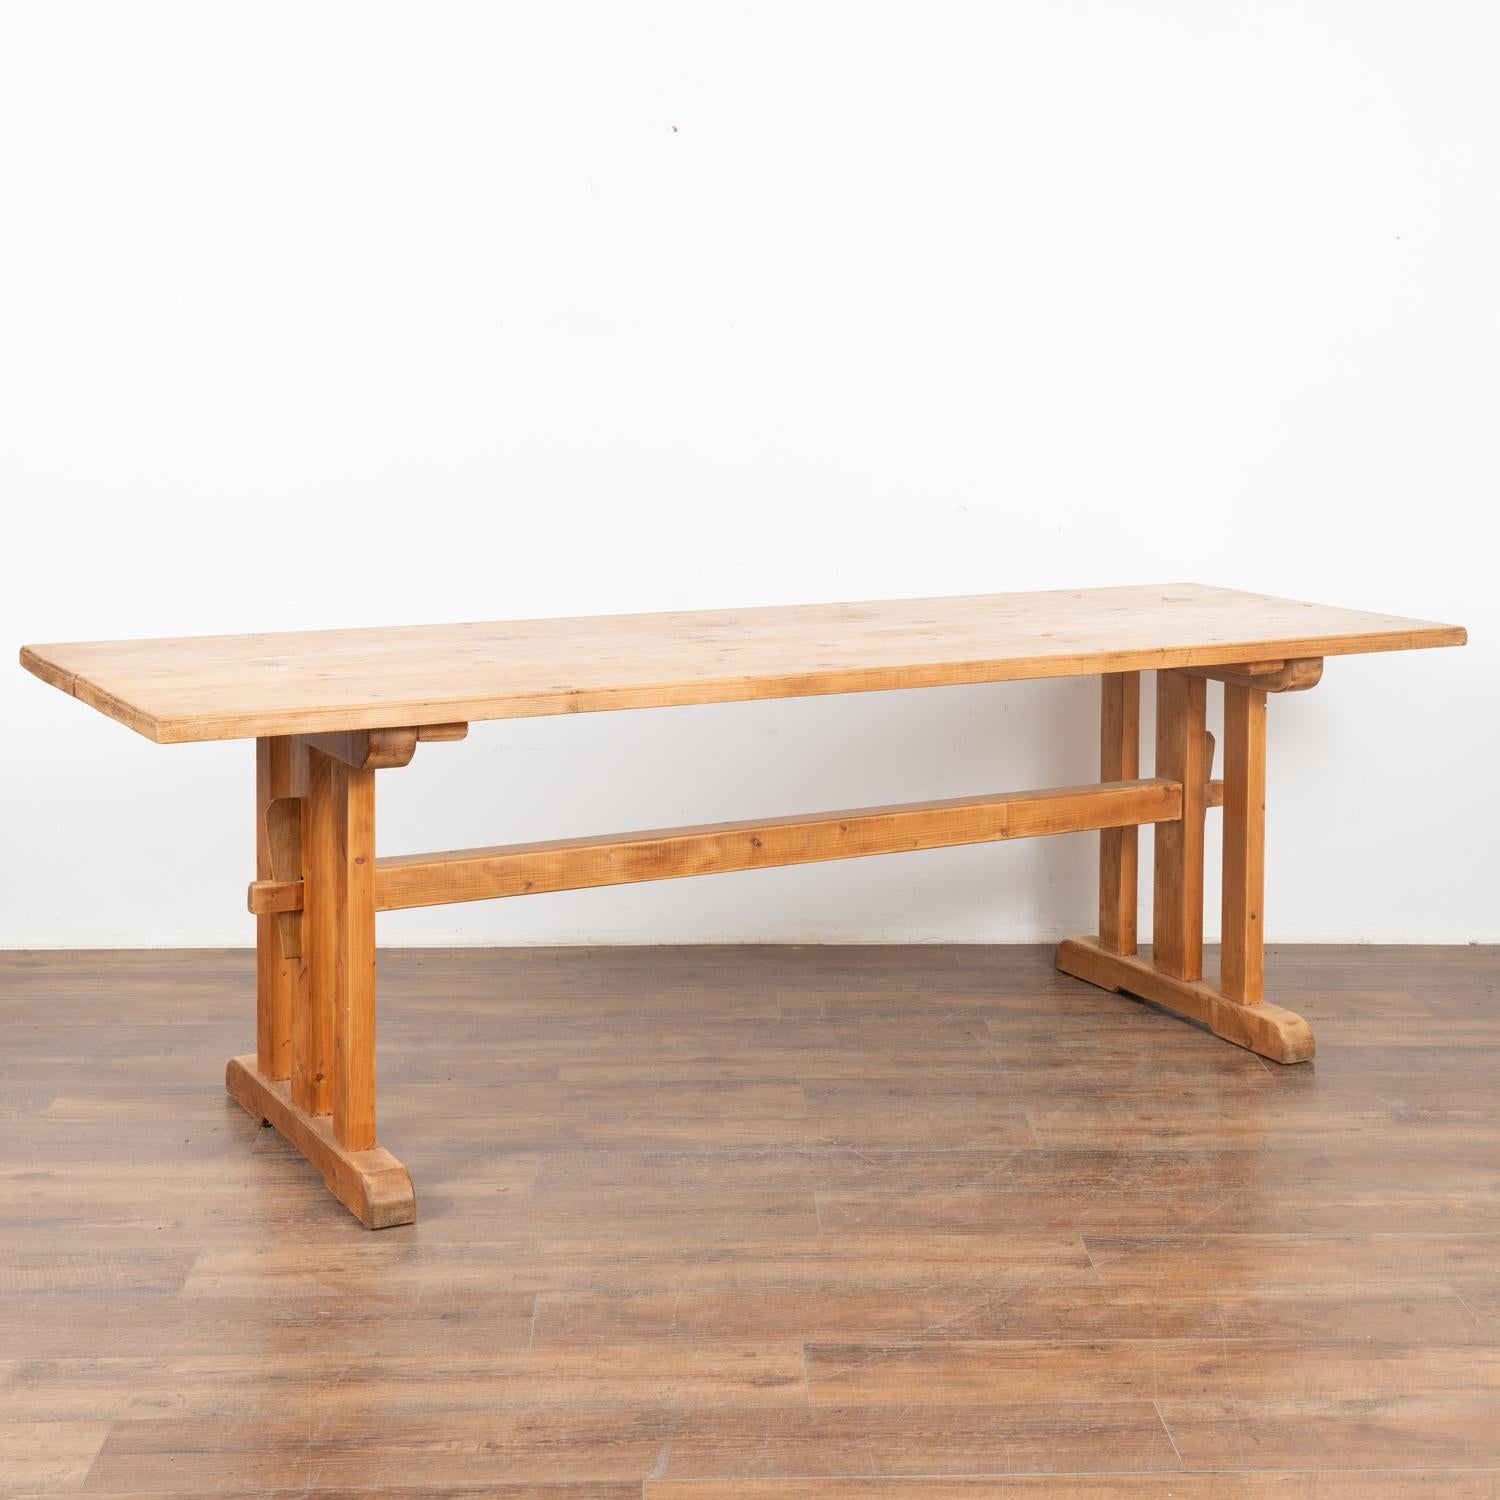 It is the long stretcher and wide platform feet of the base that give this wonderful pine trestle table it's country charm in addition to strength and stability.
The top reveals old scratches, cracks, stains, nicks, etc. which all add to the